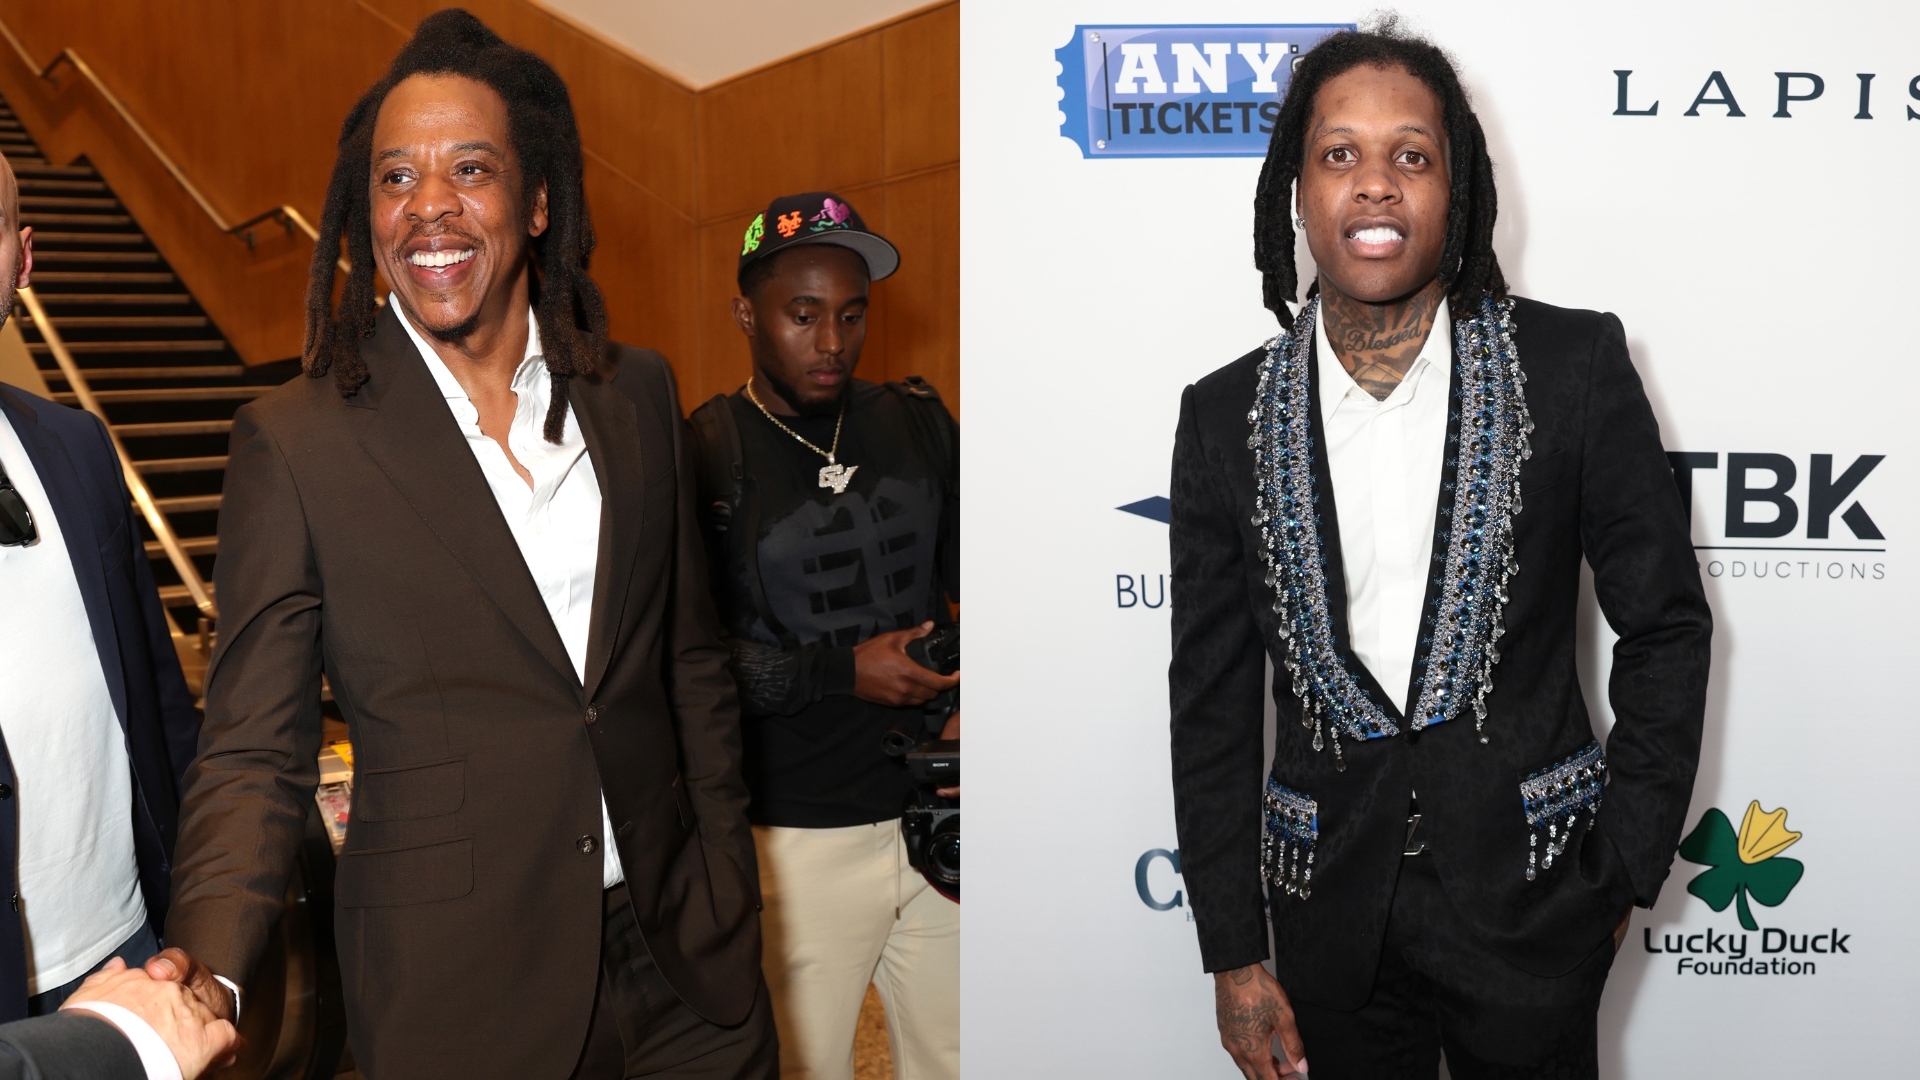 Jay-Z & Lil Durk Link Up After Beyonce’s Show In Los Angeles